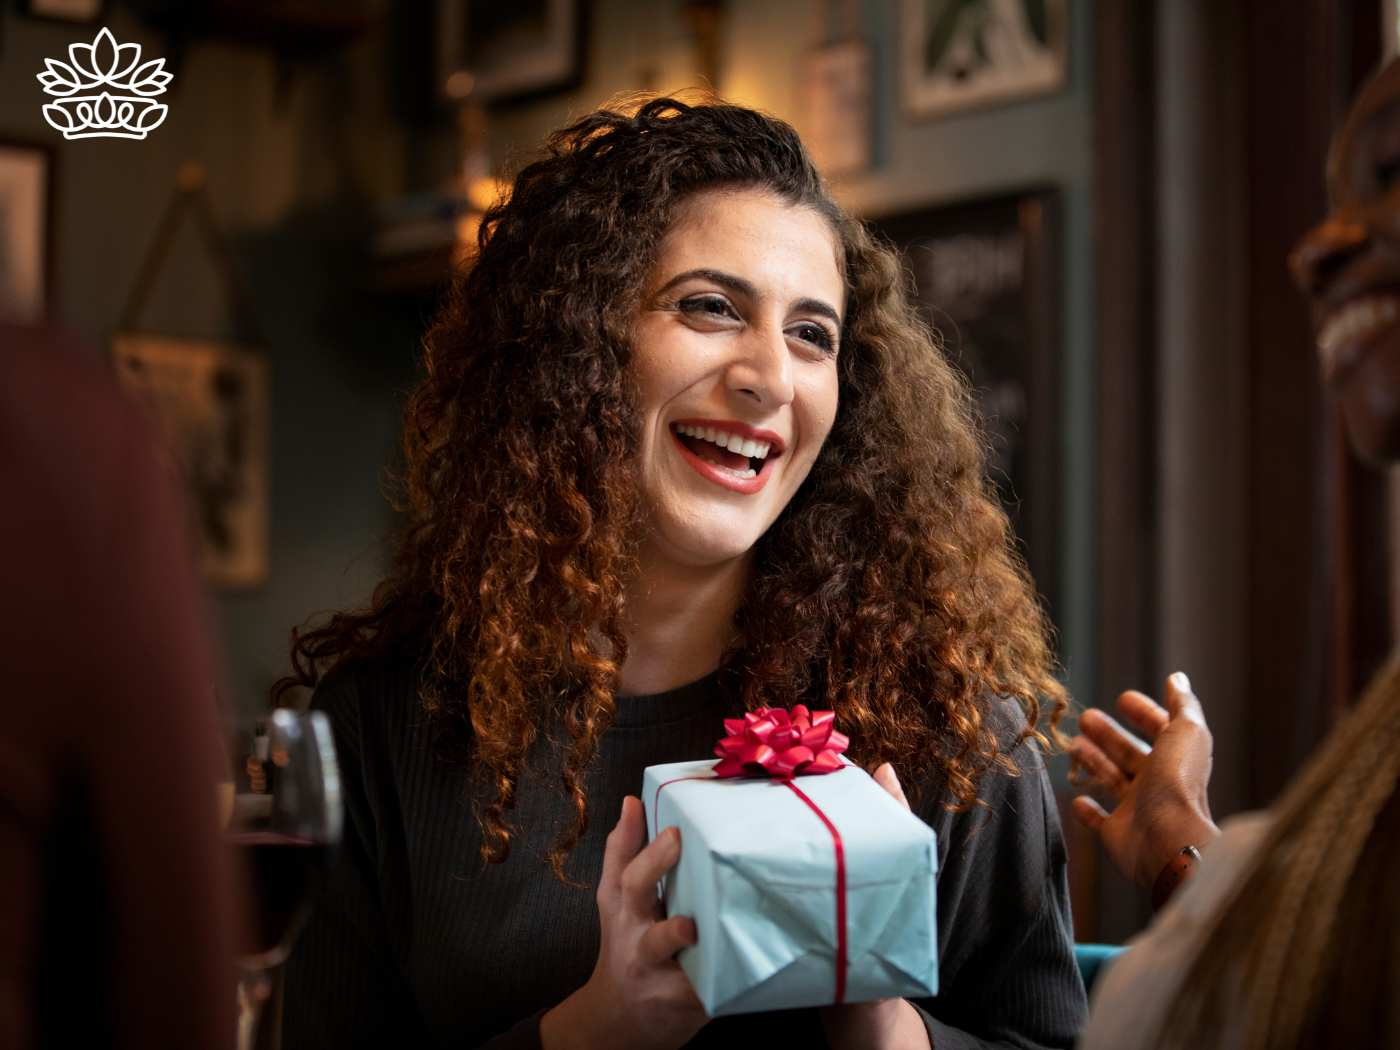 Joyful woman with curly hair laughing and holding a gift box at a social gathering, exemplifying the delight of the Gift Boxes by Recipient Collection from Fabulous Flowers and Gifts.